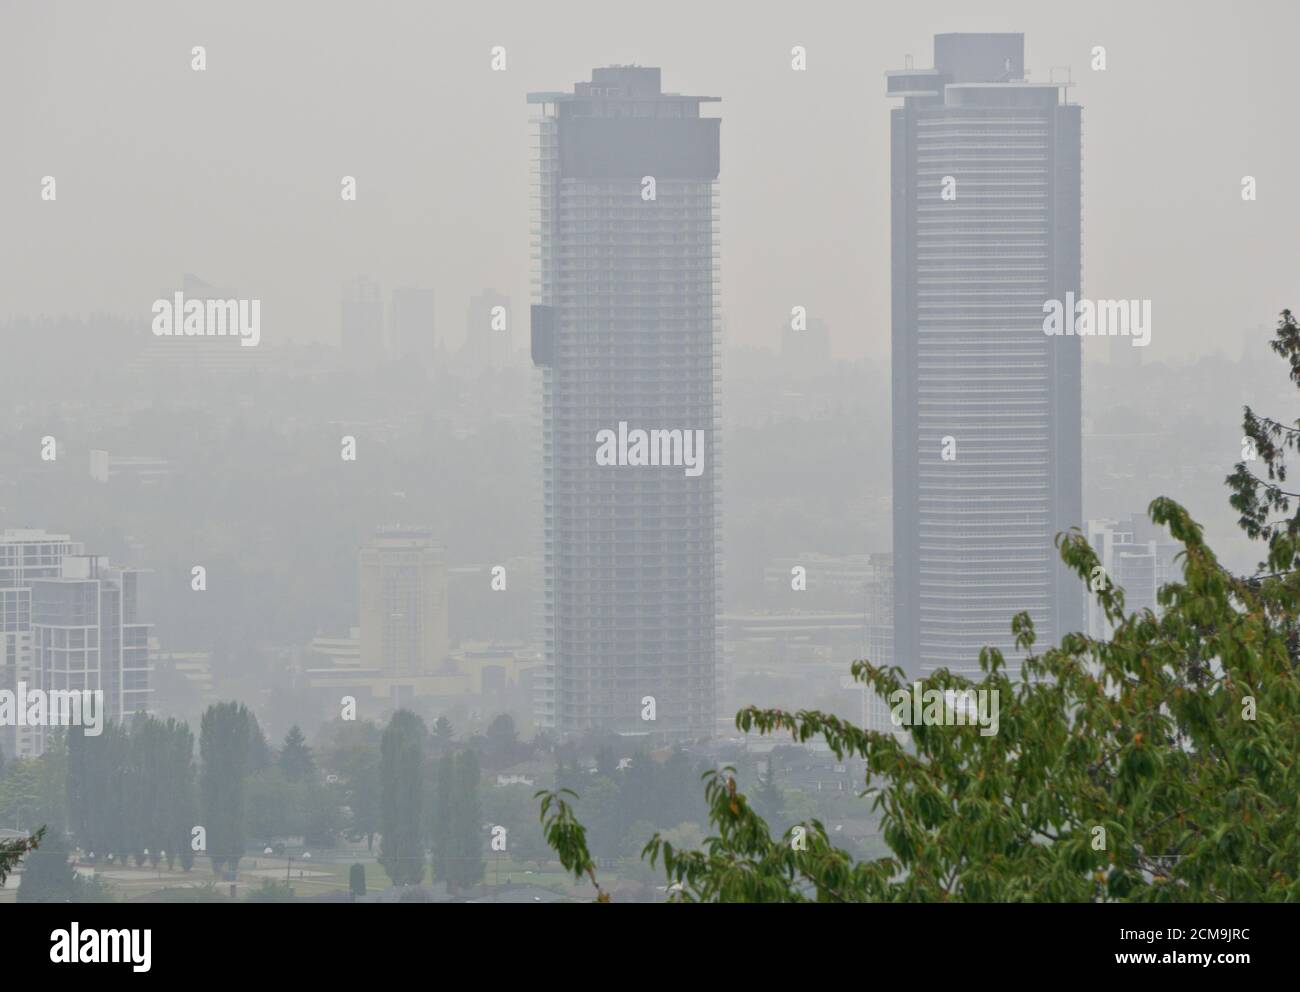 Burnaby, British Columbia, Canada.  16 September 2020.  Thick smoke obscures the condo towers in Burnaby as Metro Vancouver endures another day of air quality advisories.  Smoke from forest fires in Washington State and Oregon continues to drift into the area. Stock Photo